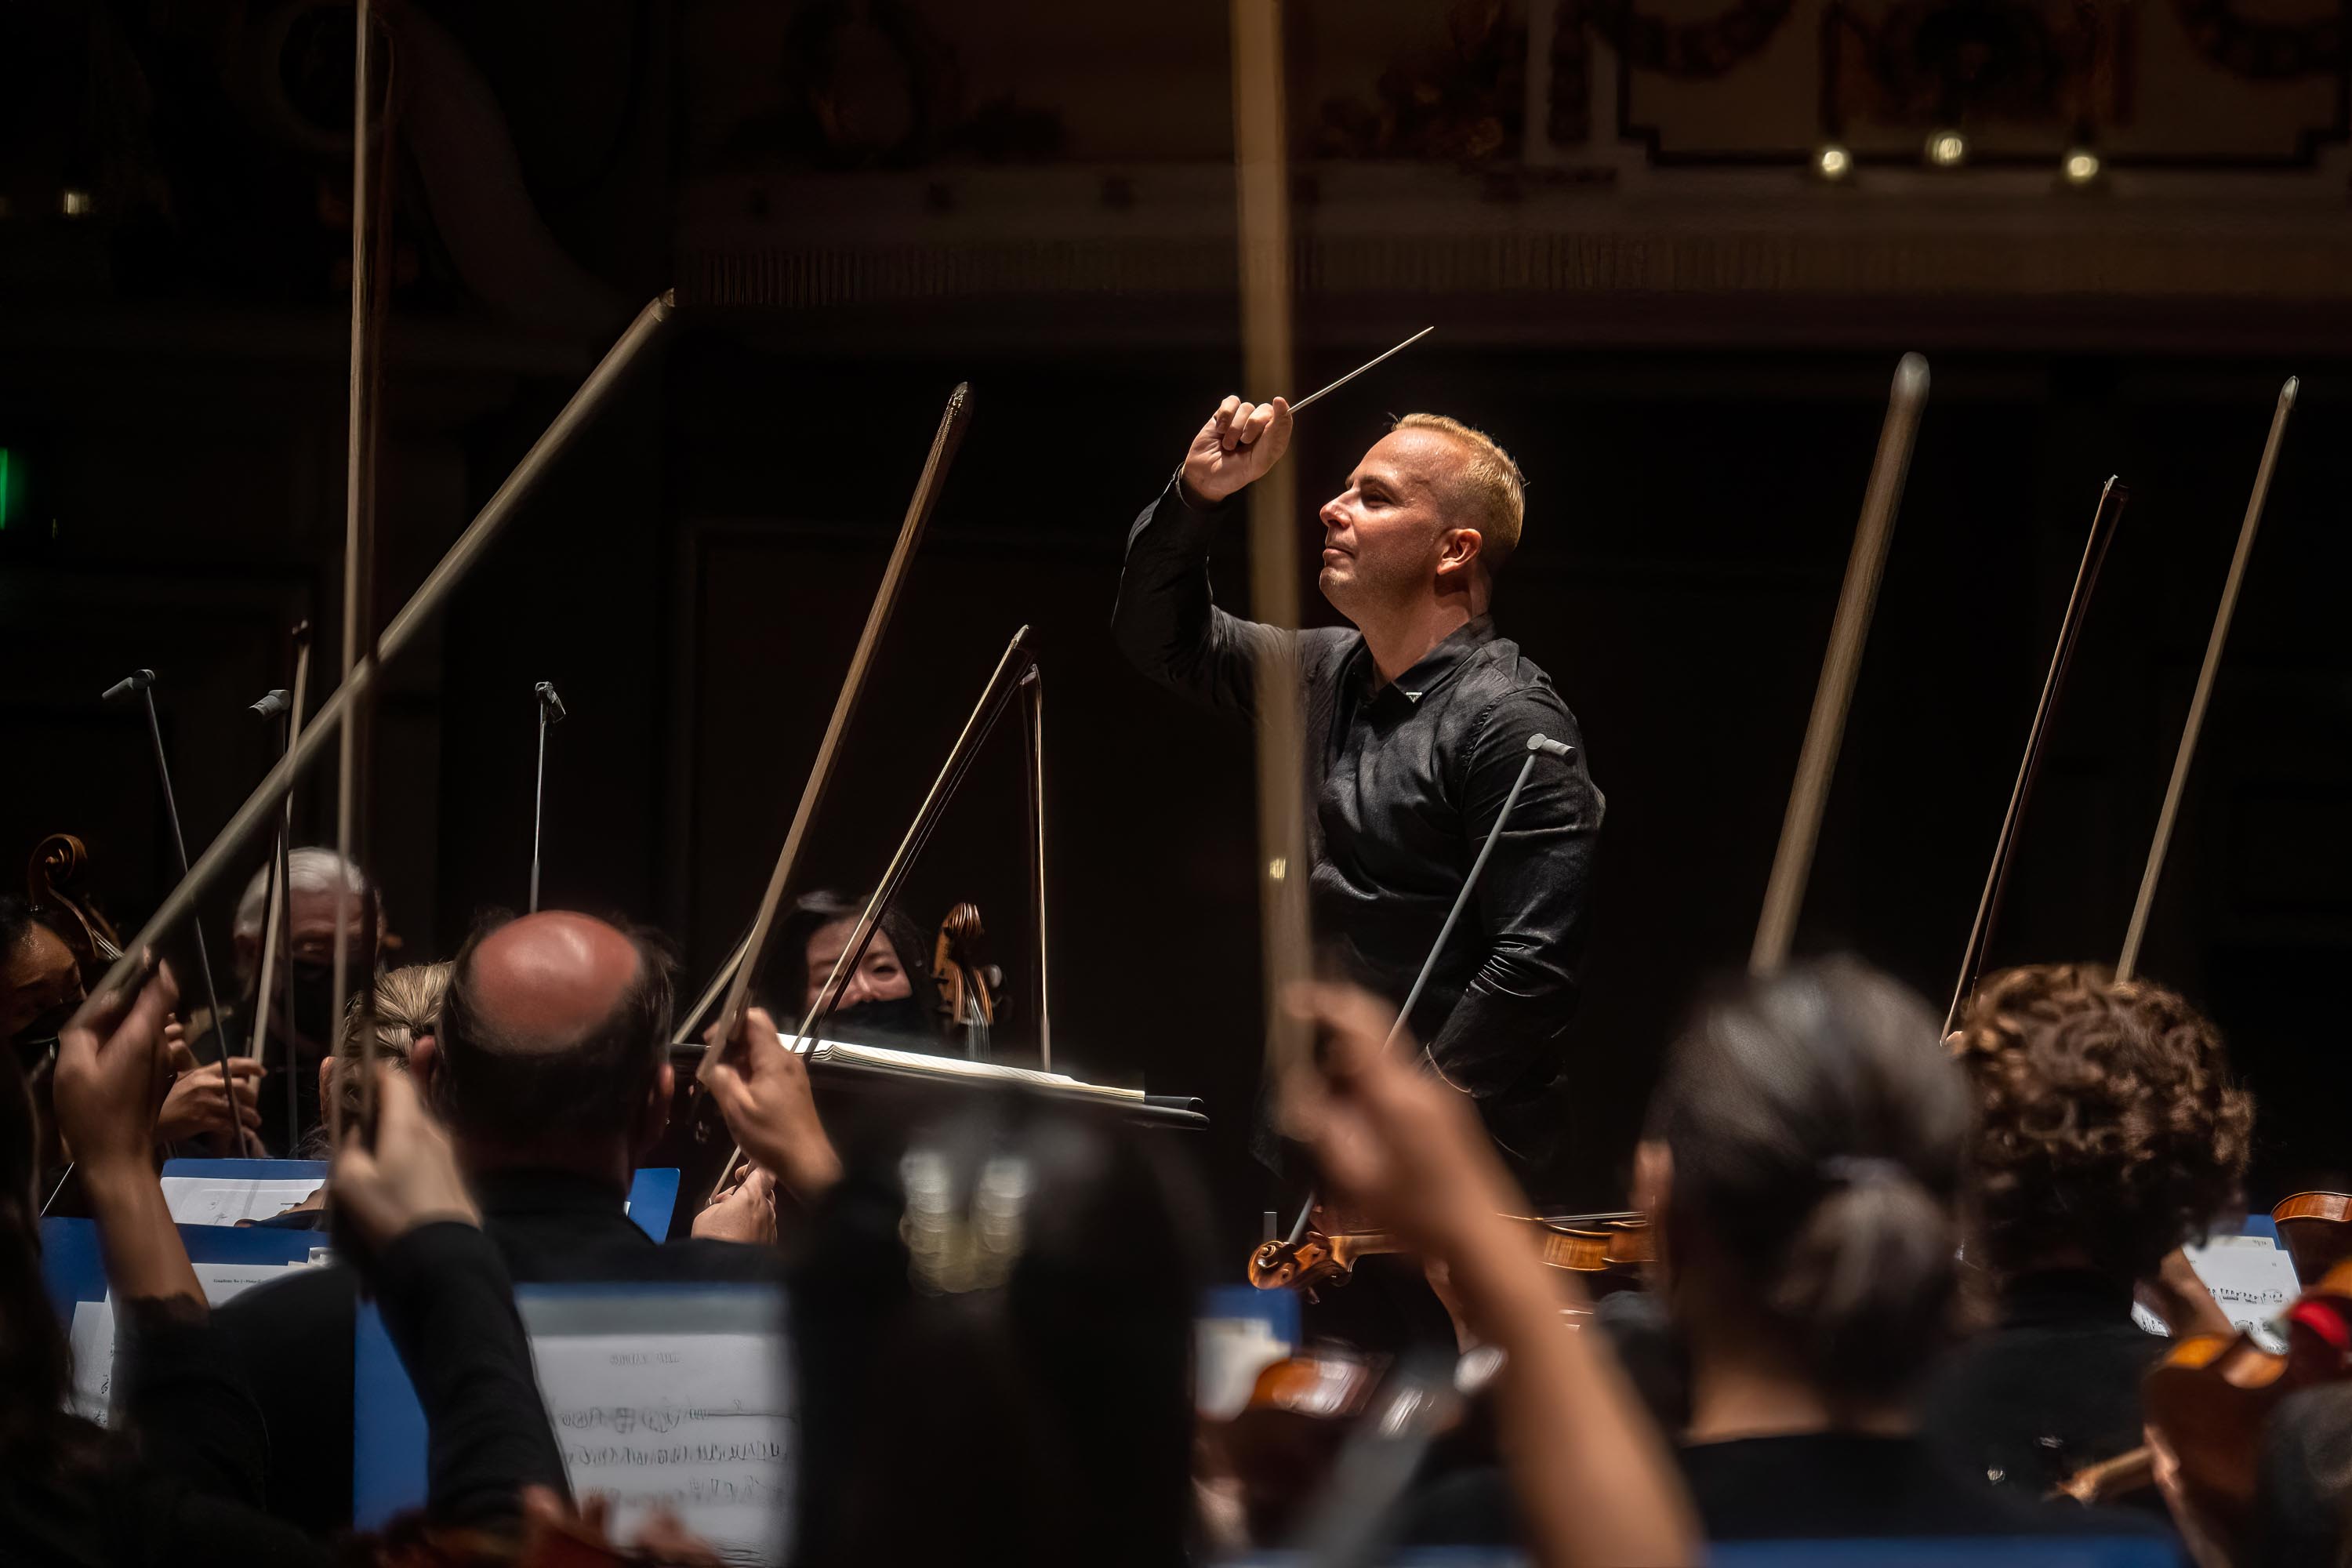 The selection of the Frank and Price pieces show the Orchestra’s ongoing commitment to creative equity and inclusion in the world of orchestral music